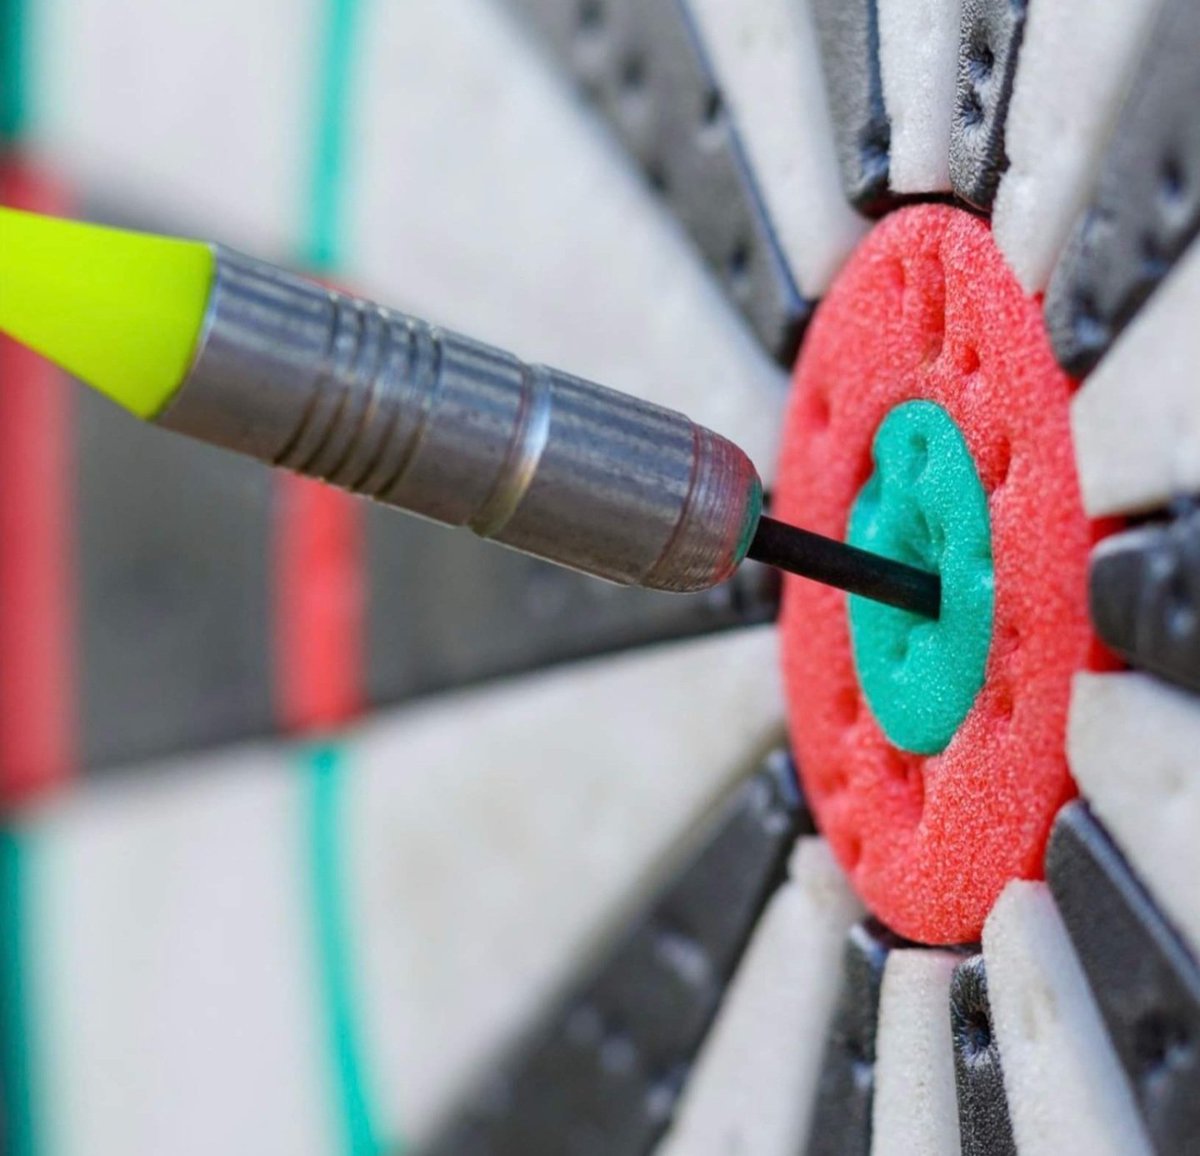 For effective social selling you need to know your target market and choose the best way to appeal to them.

To read my blog on this topic and pick up some top tips, click: linkedin.com/analytics/post…

#targetmarket #idealaudience #marketingtips